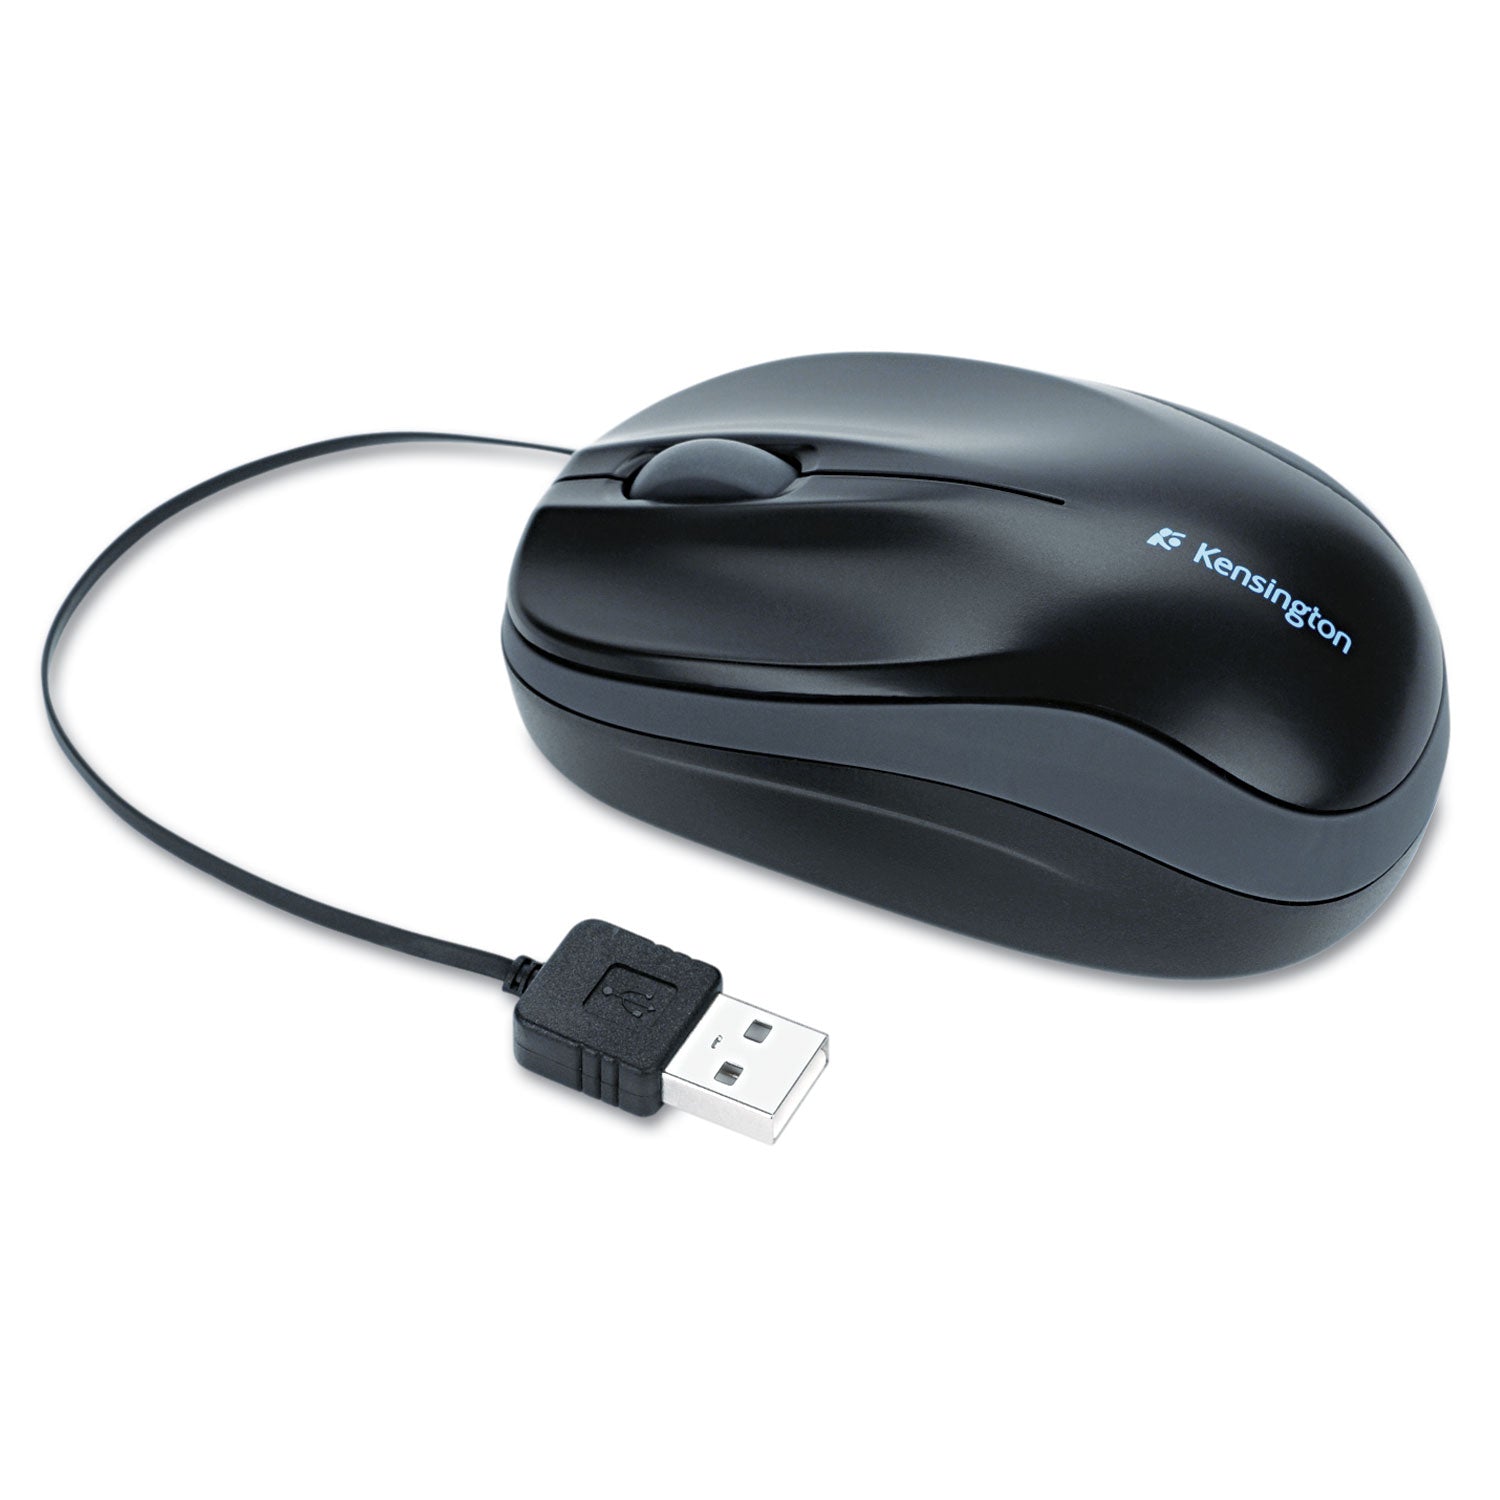 Pro Fit Optical Mouse with Retractable Cord, USB 2.0, Left/Right Hand Use, Black - 